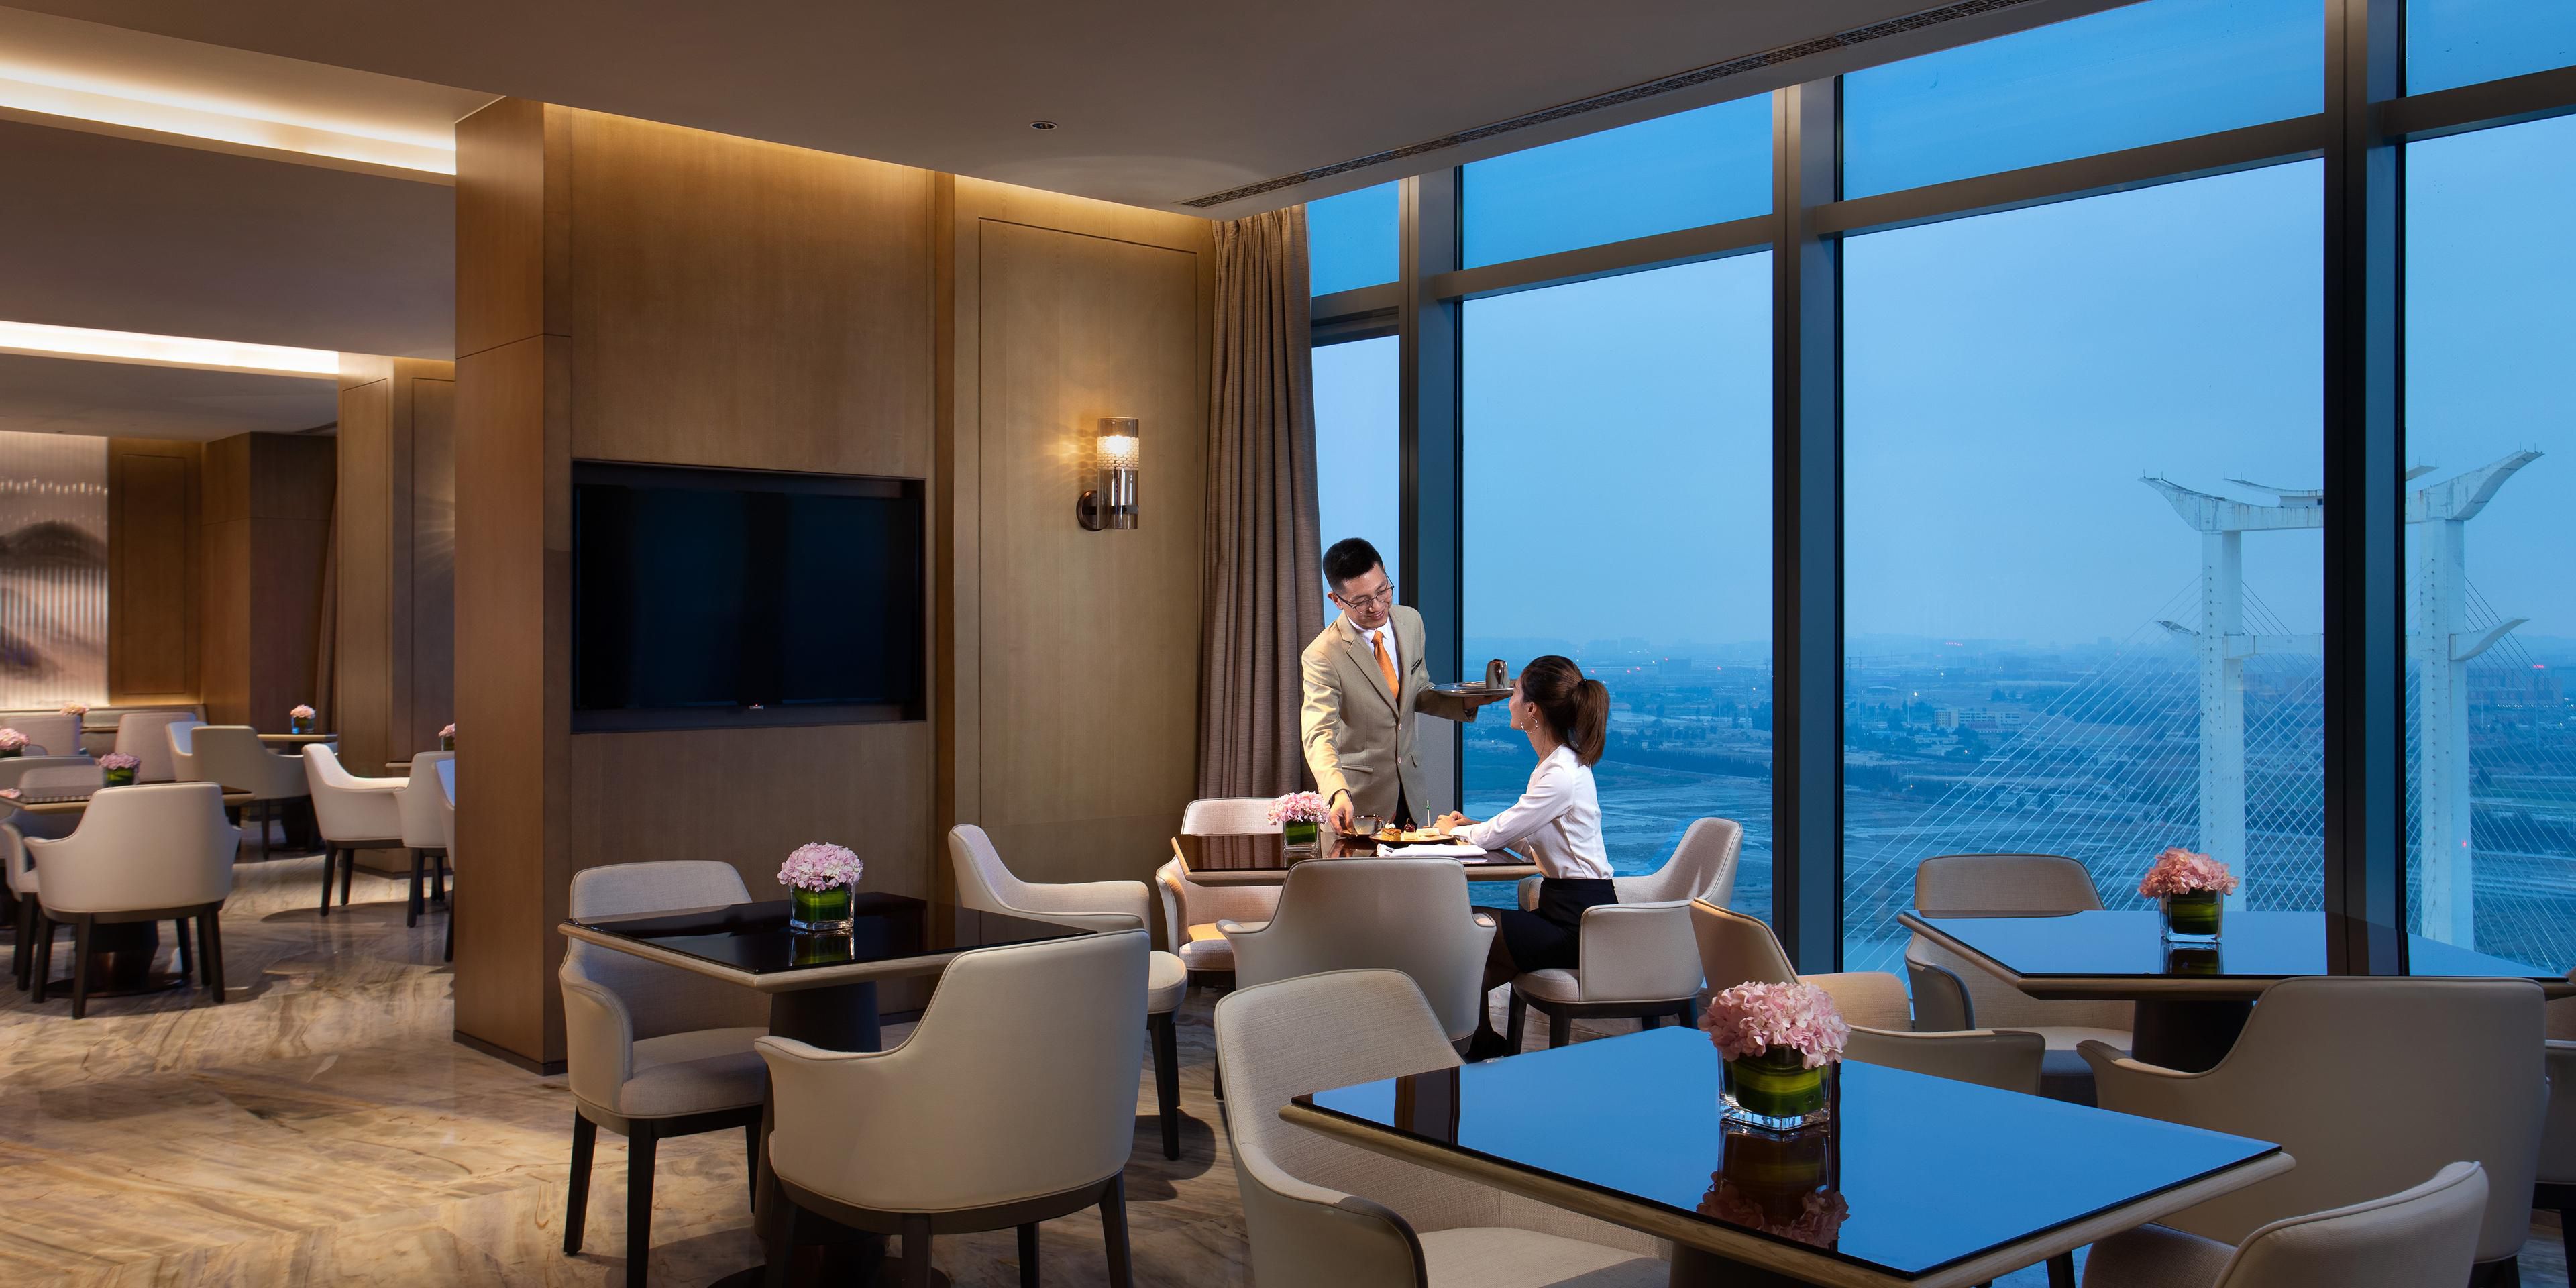 Located on the 26th floor, Club InterContinental offers guests breakfast, afternoon tea, evening cocktails and all-day tea and snacks along with other privileges. The exclusive club is the ideal space for both social and business meetings.